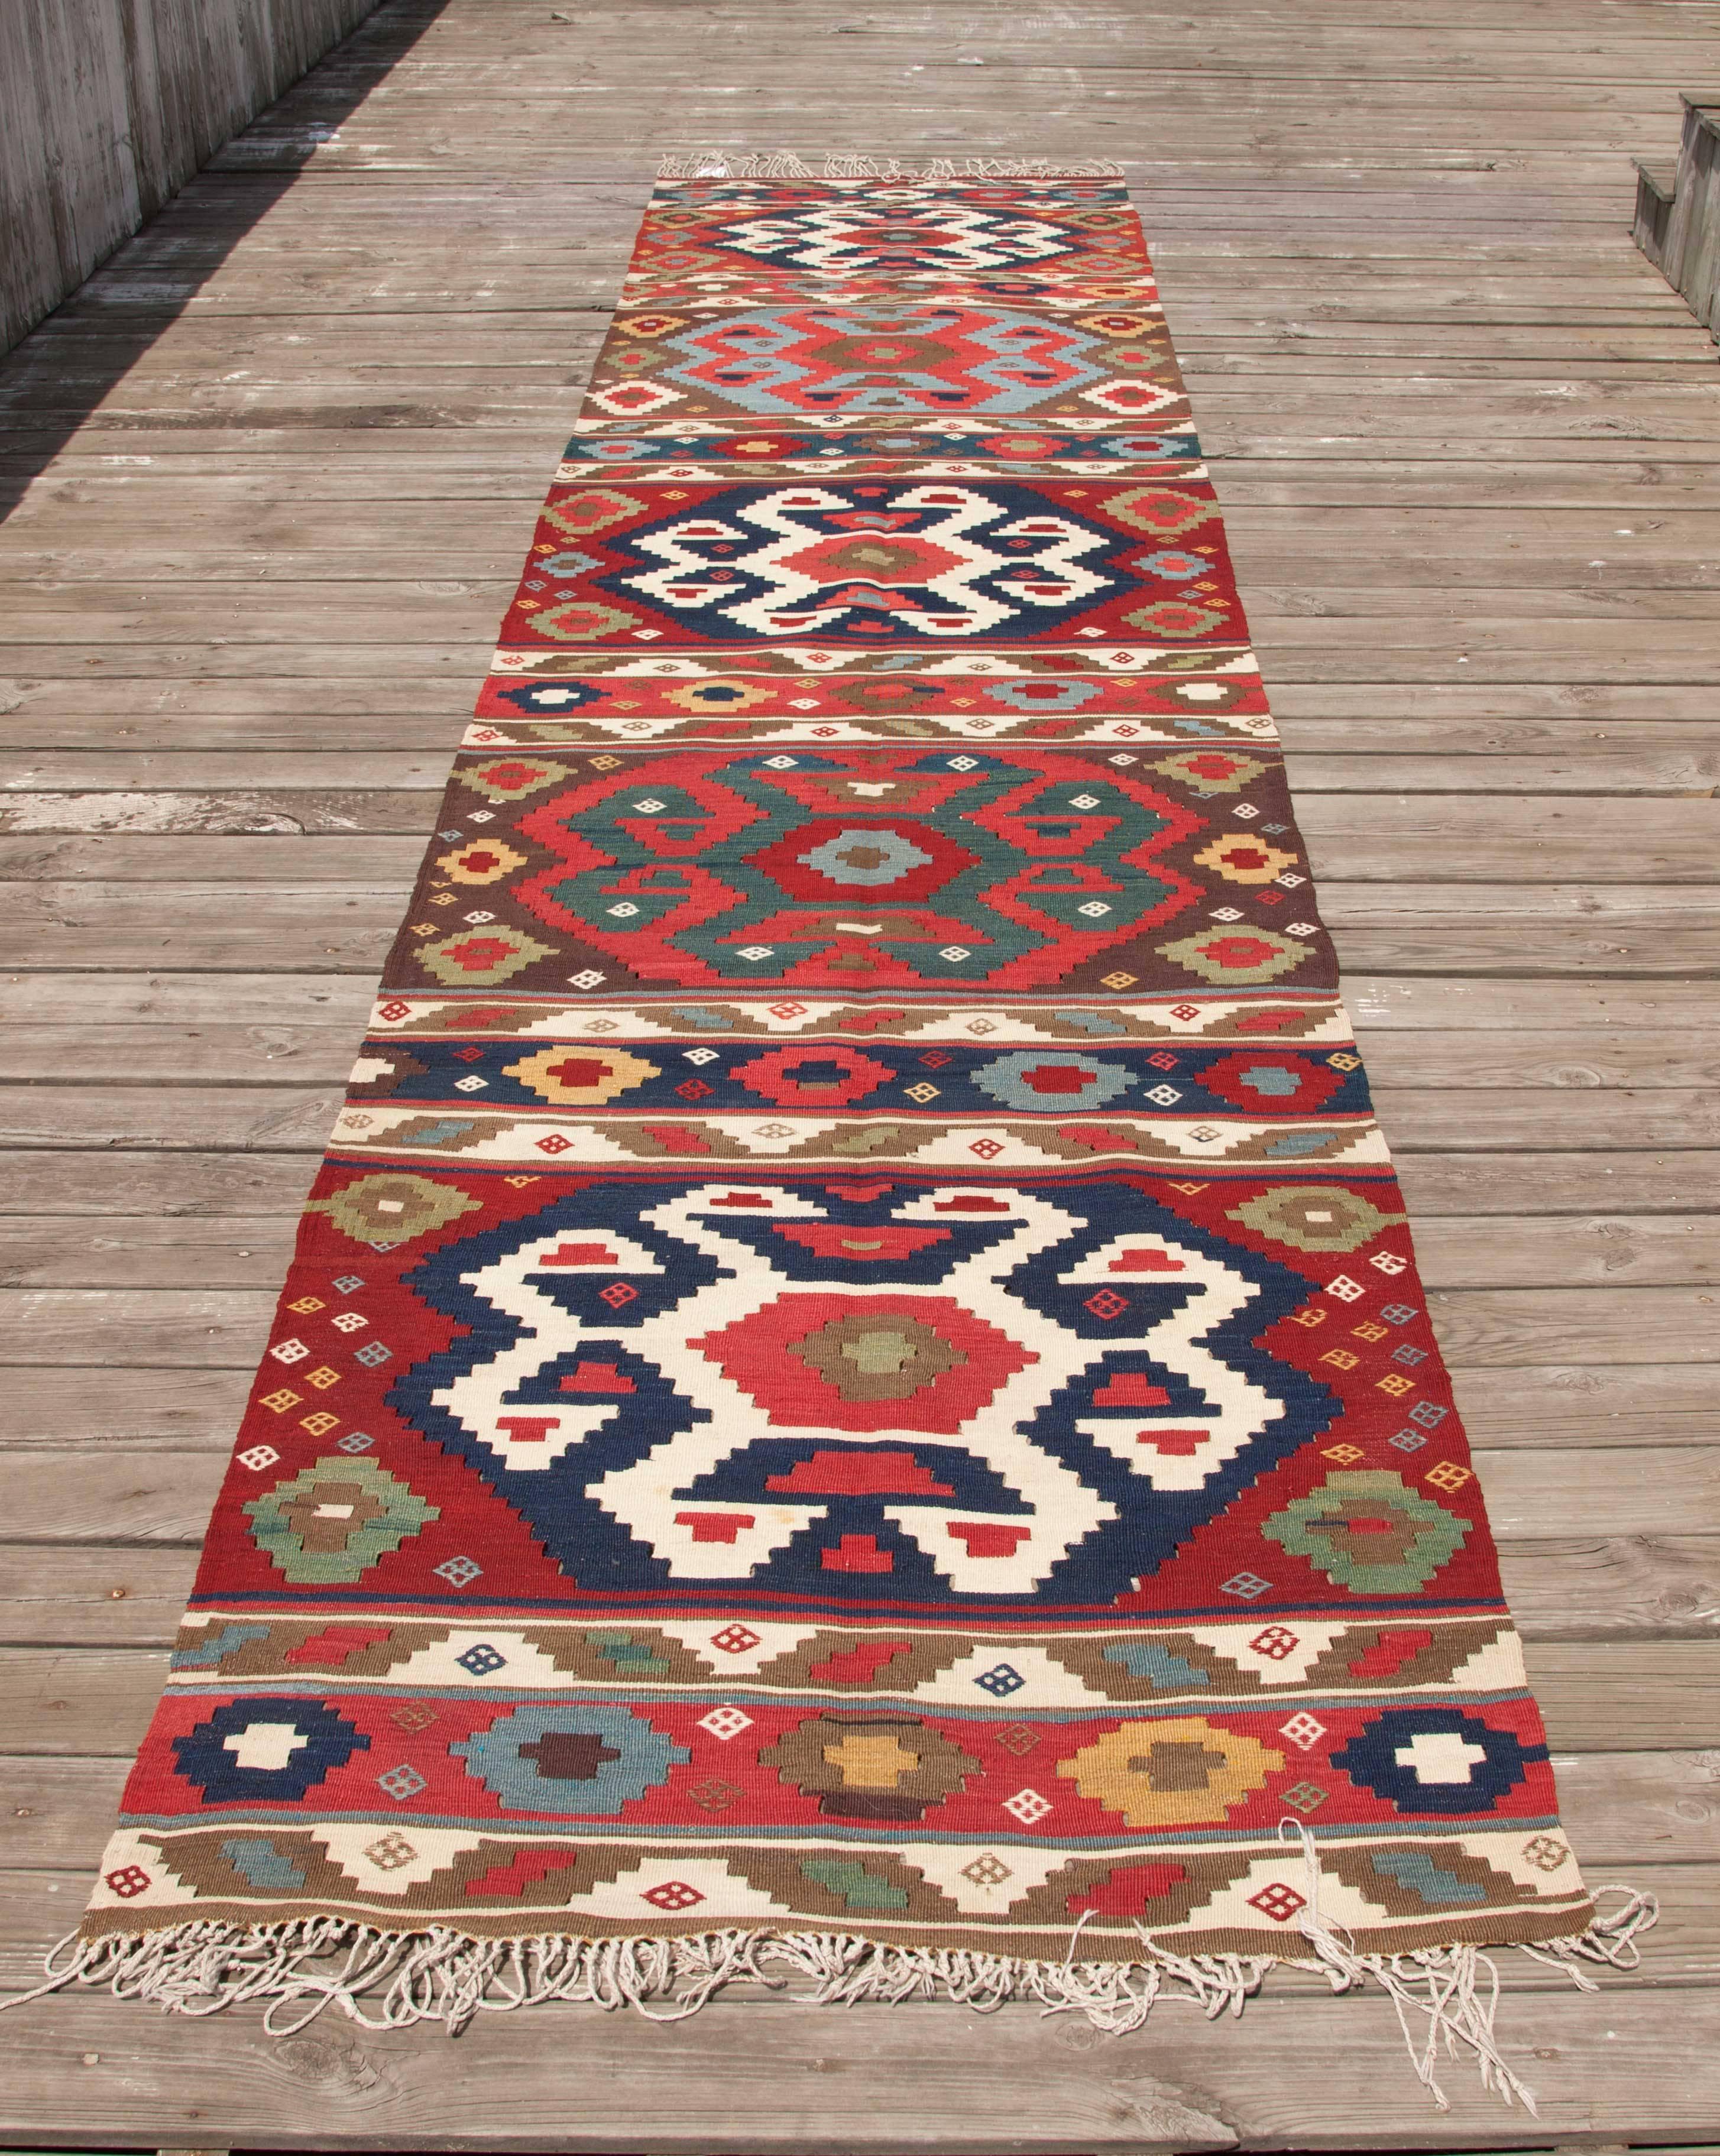 Hand-Woven 19th Century Antique South Caucasian Kilim with a Very Fine Texture